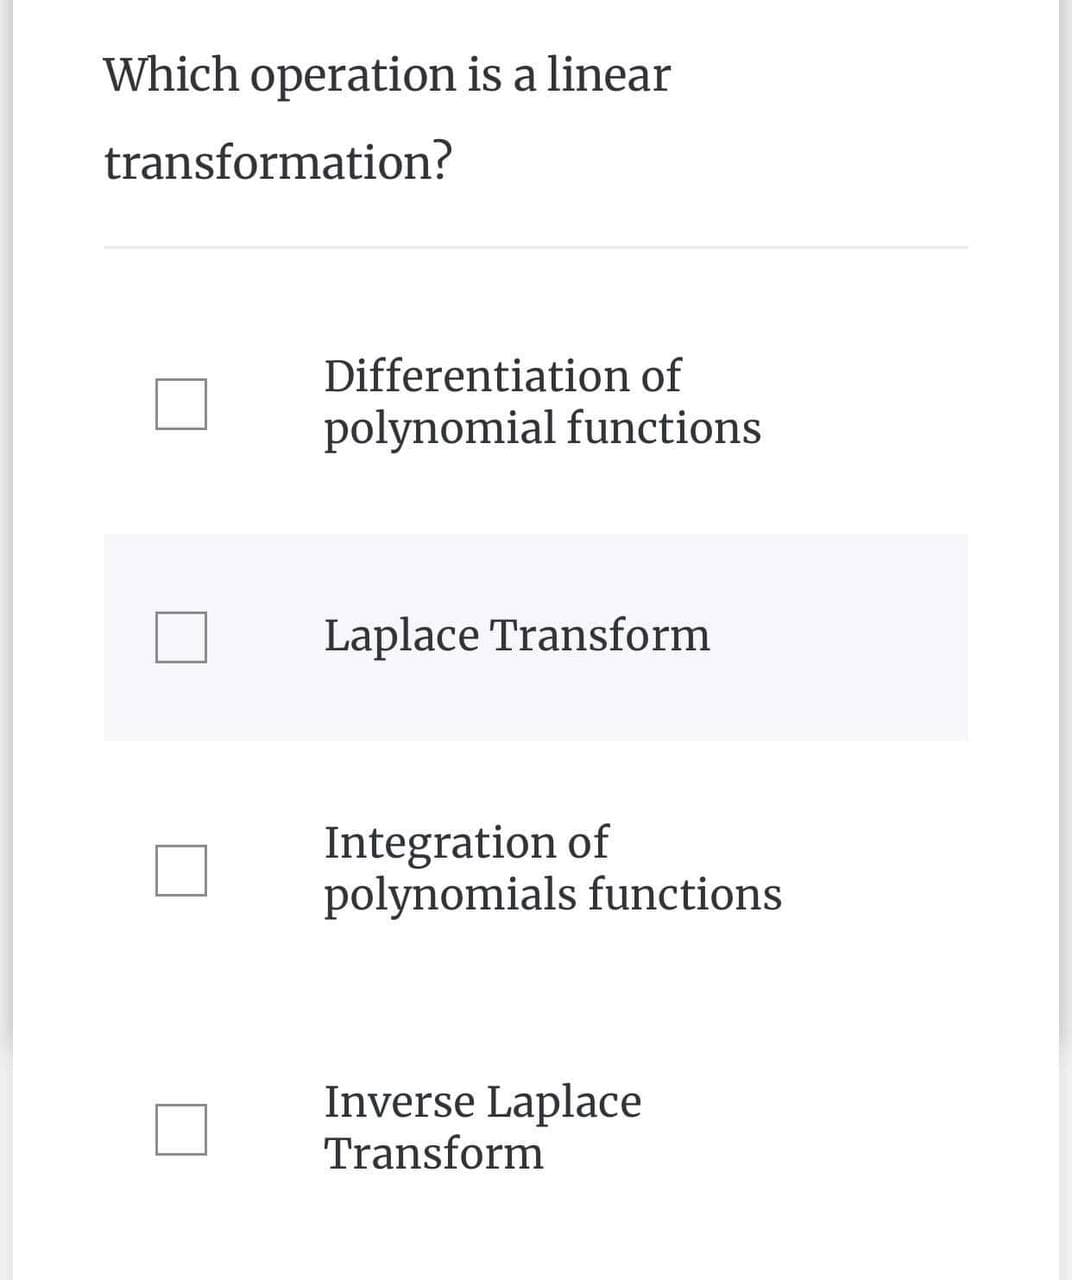 Which operation is a linear
transformation?
Differentiation of
polynomial functions
Laplace Transform
Integration of
polynomials functions
Inverse Laplace
Transform